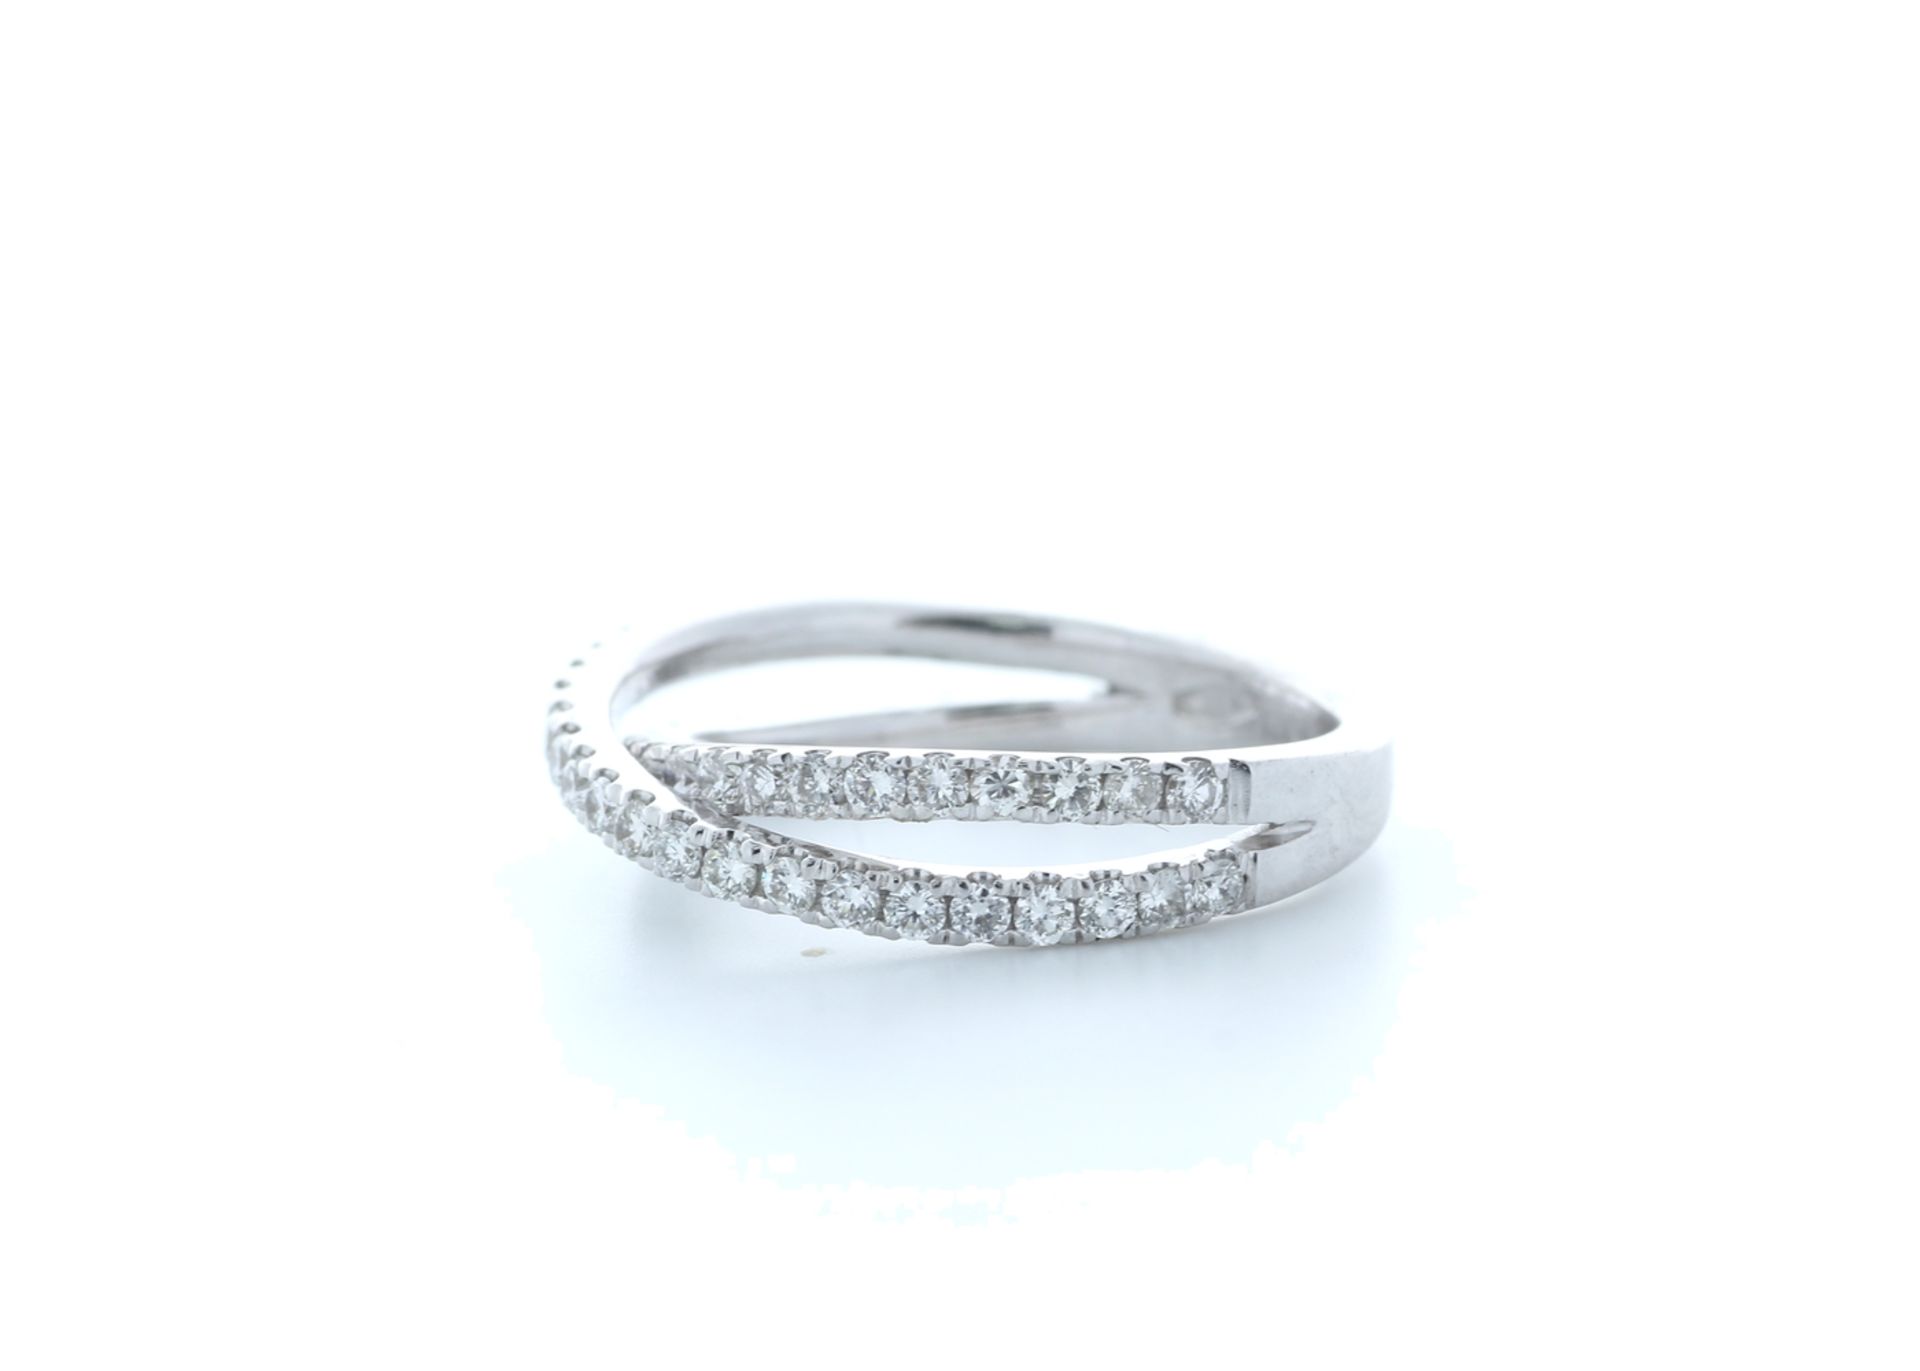 18ct White Gold Claw Set Semi Eternity Diamond Ring 0.73 Carats - Valued by IDI £4,950.00 - 18ct - Image 2 of 5